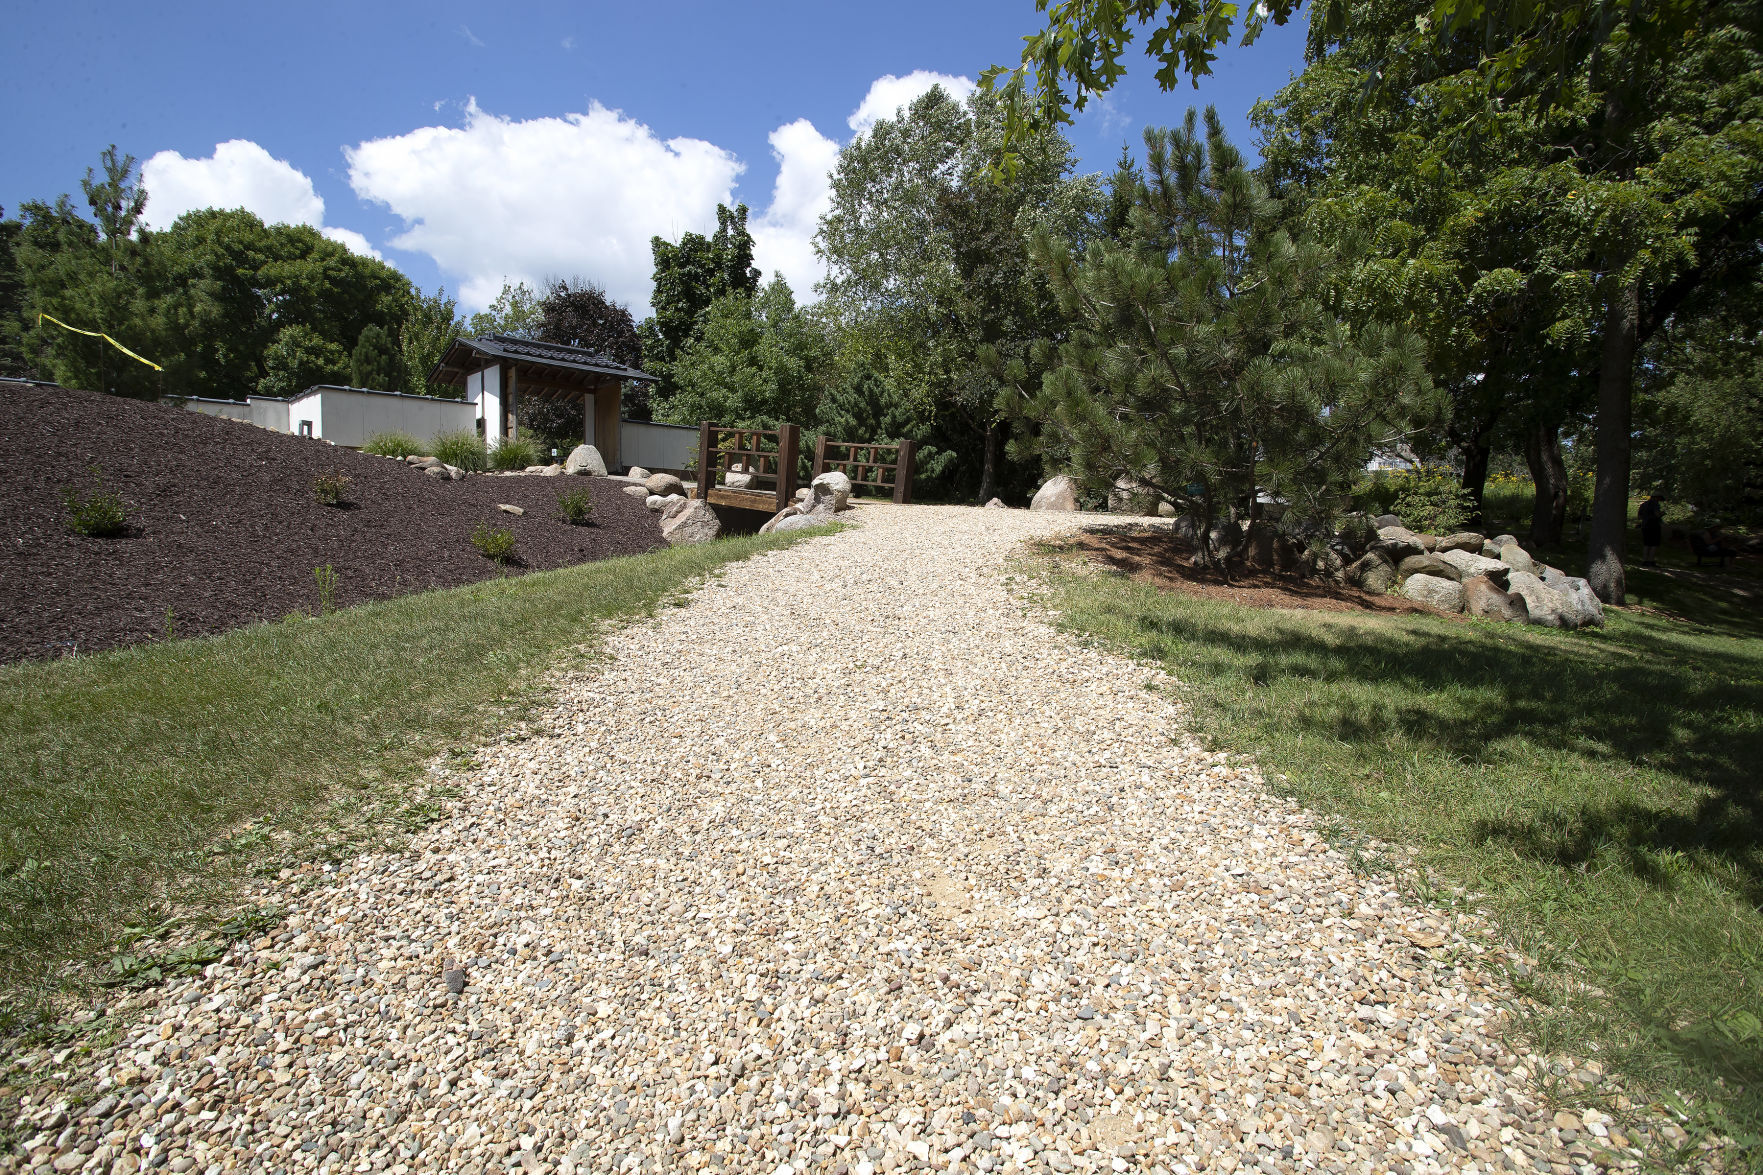 The current gravel path of Japanese Garden at the Dubuque Arboretum & Botanical Gardens on Tuesday.    PHOTO CREDIT: Stephen Gassman